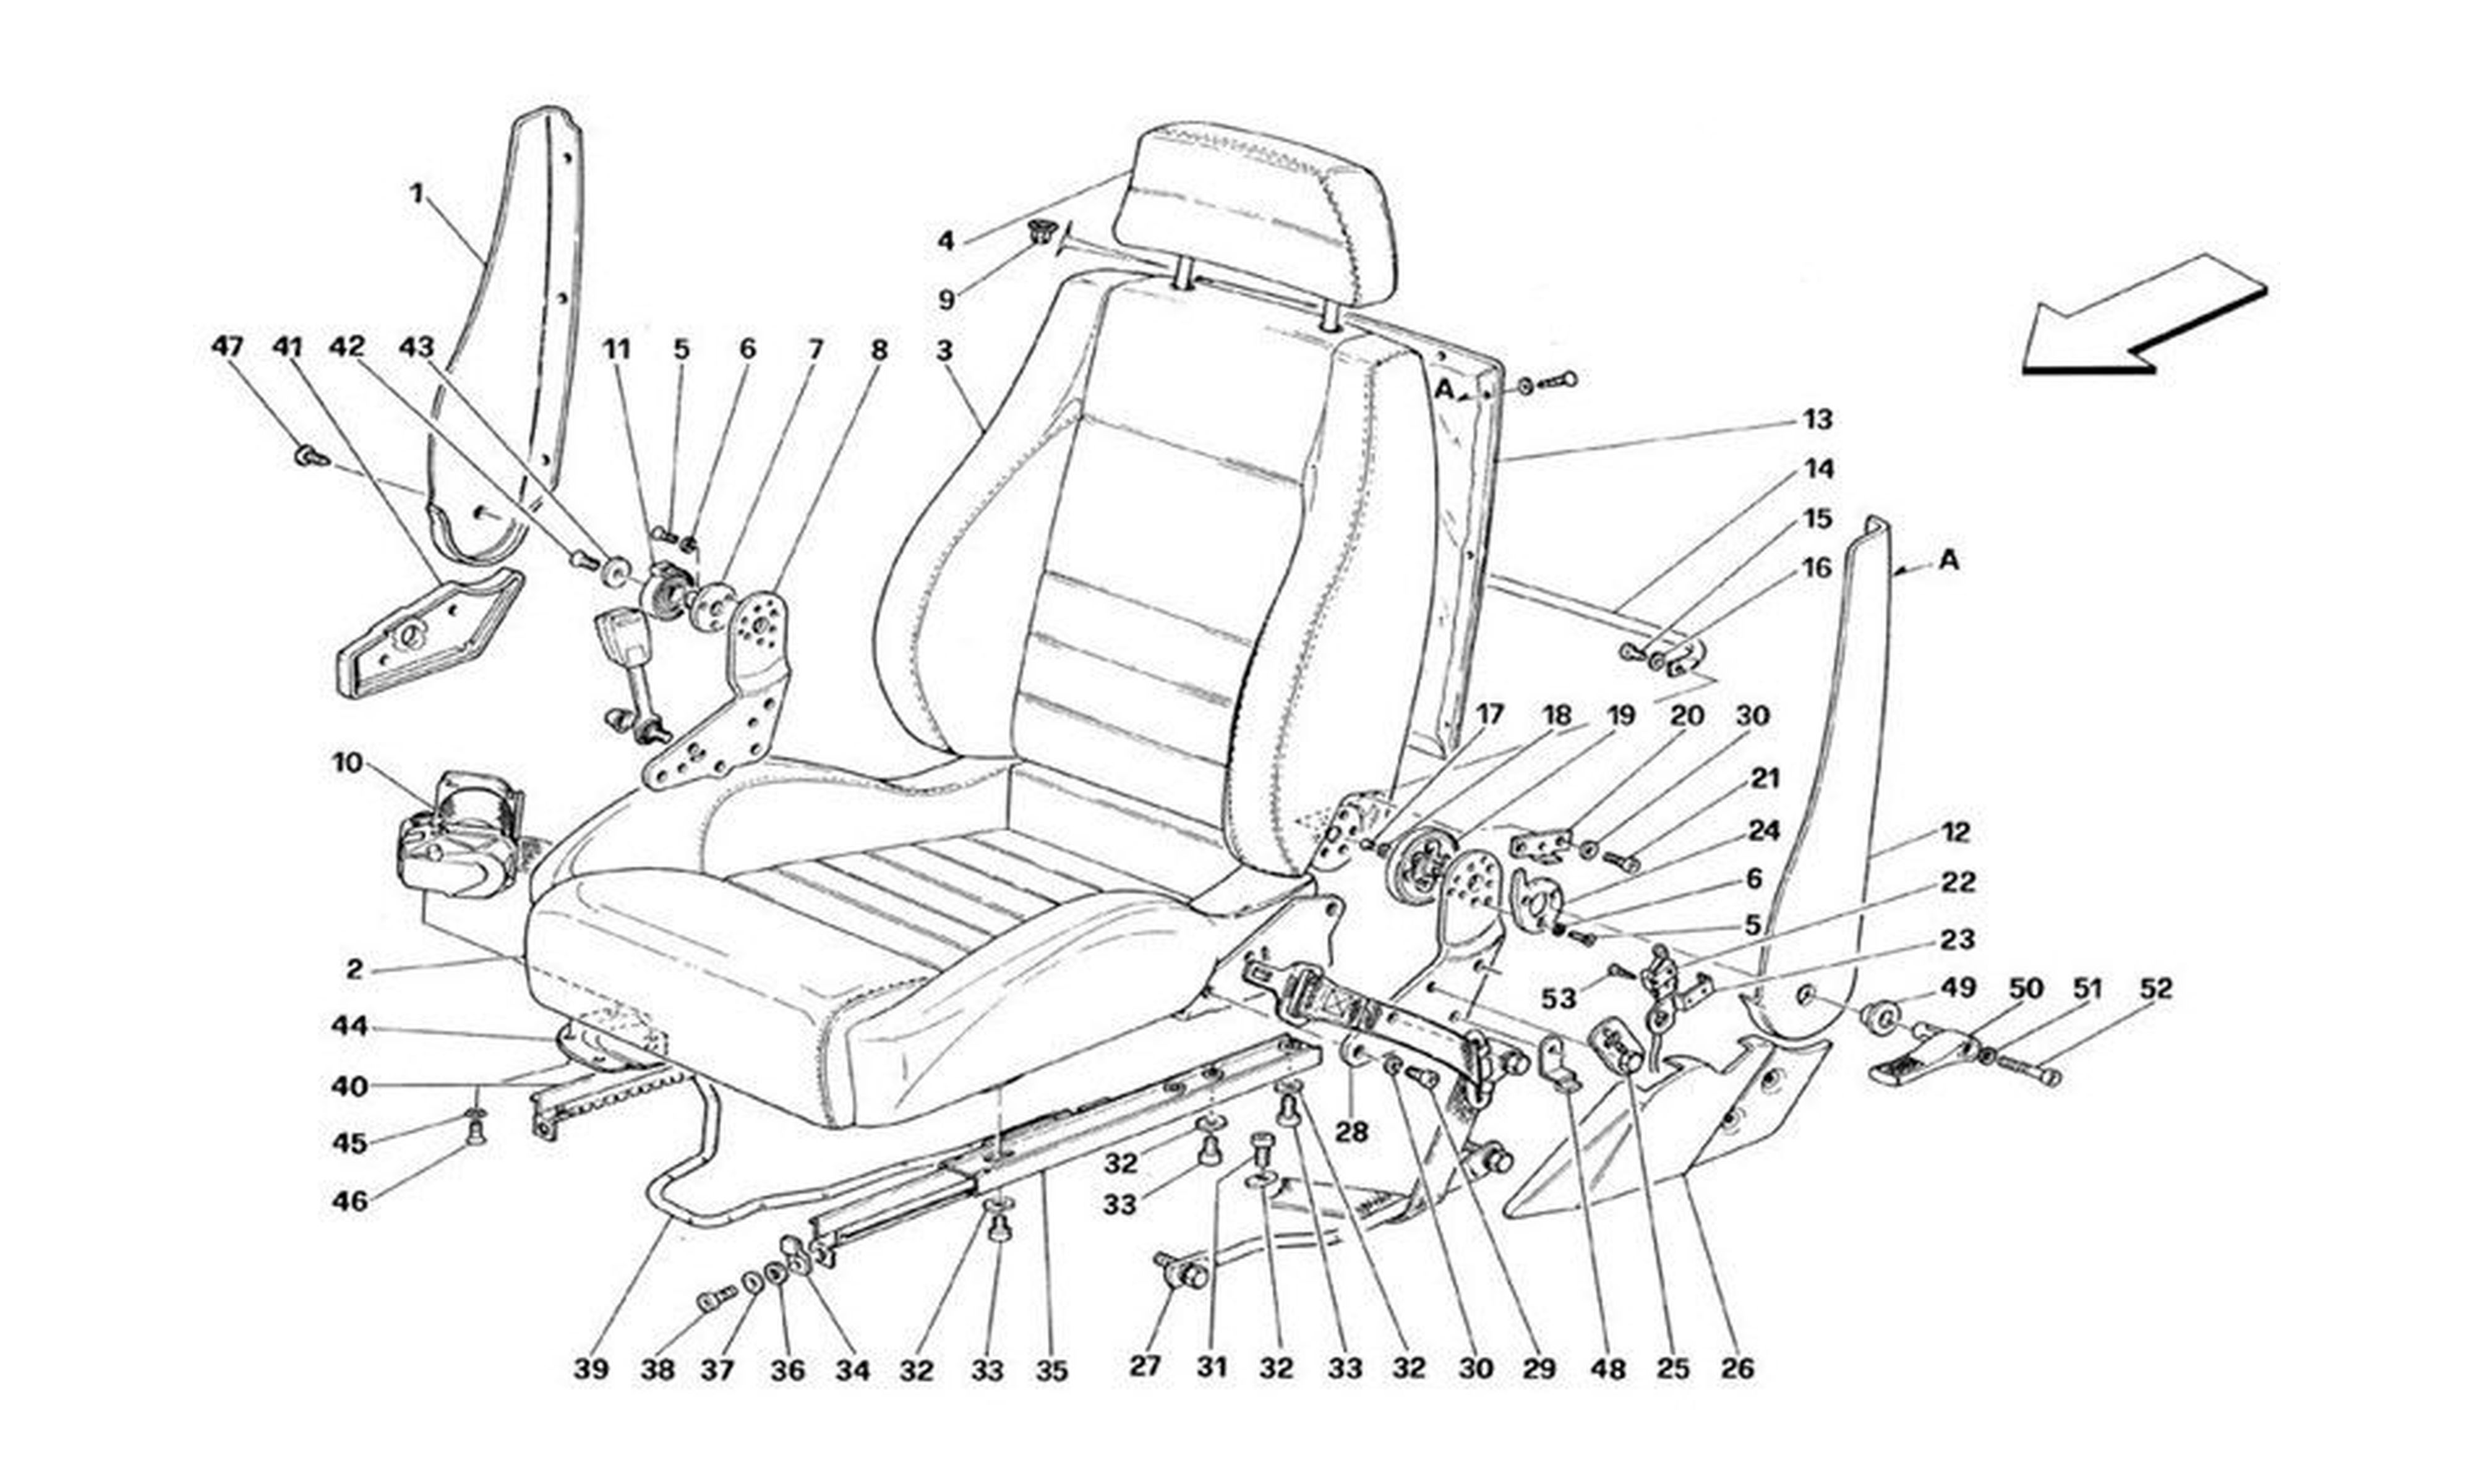 Schematic: Seats And Safety Belts - Not For Cars With Passive Safety Belts - Valid Till Car Ass. Nr. 5278